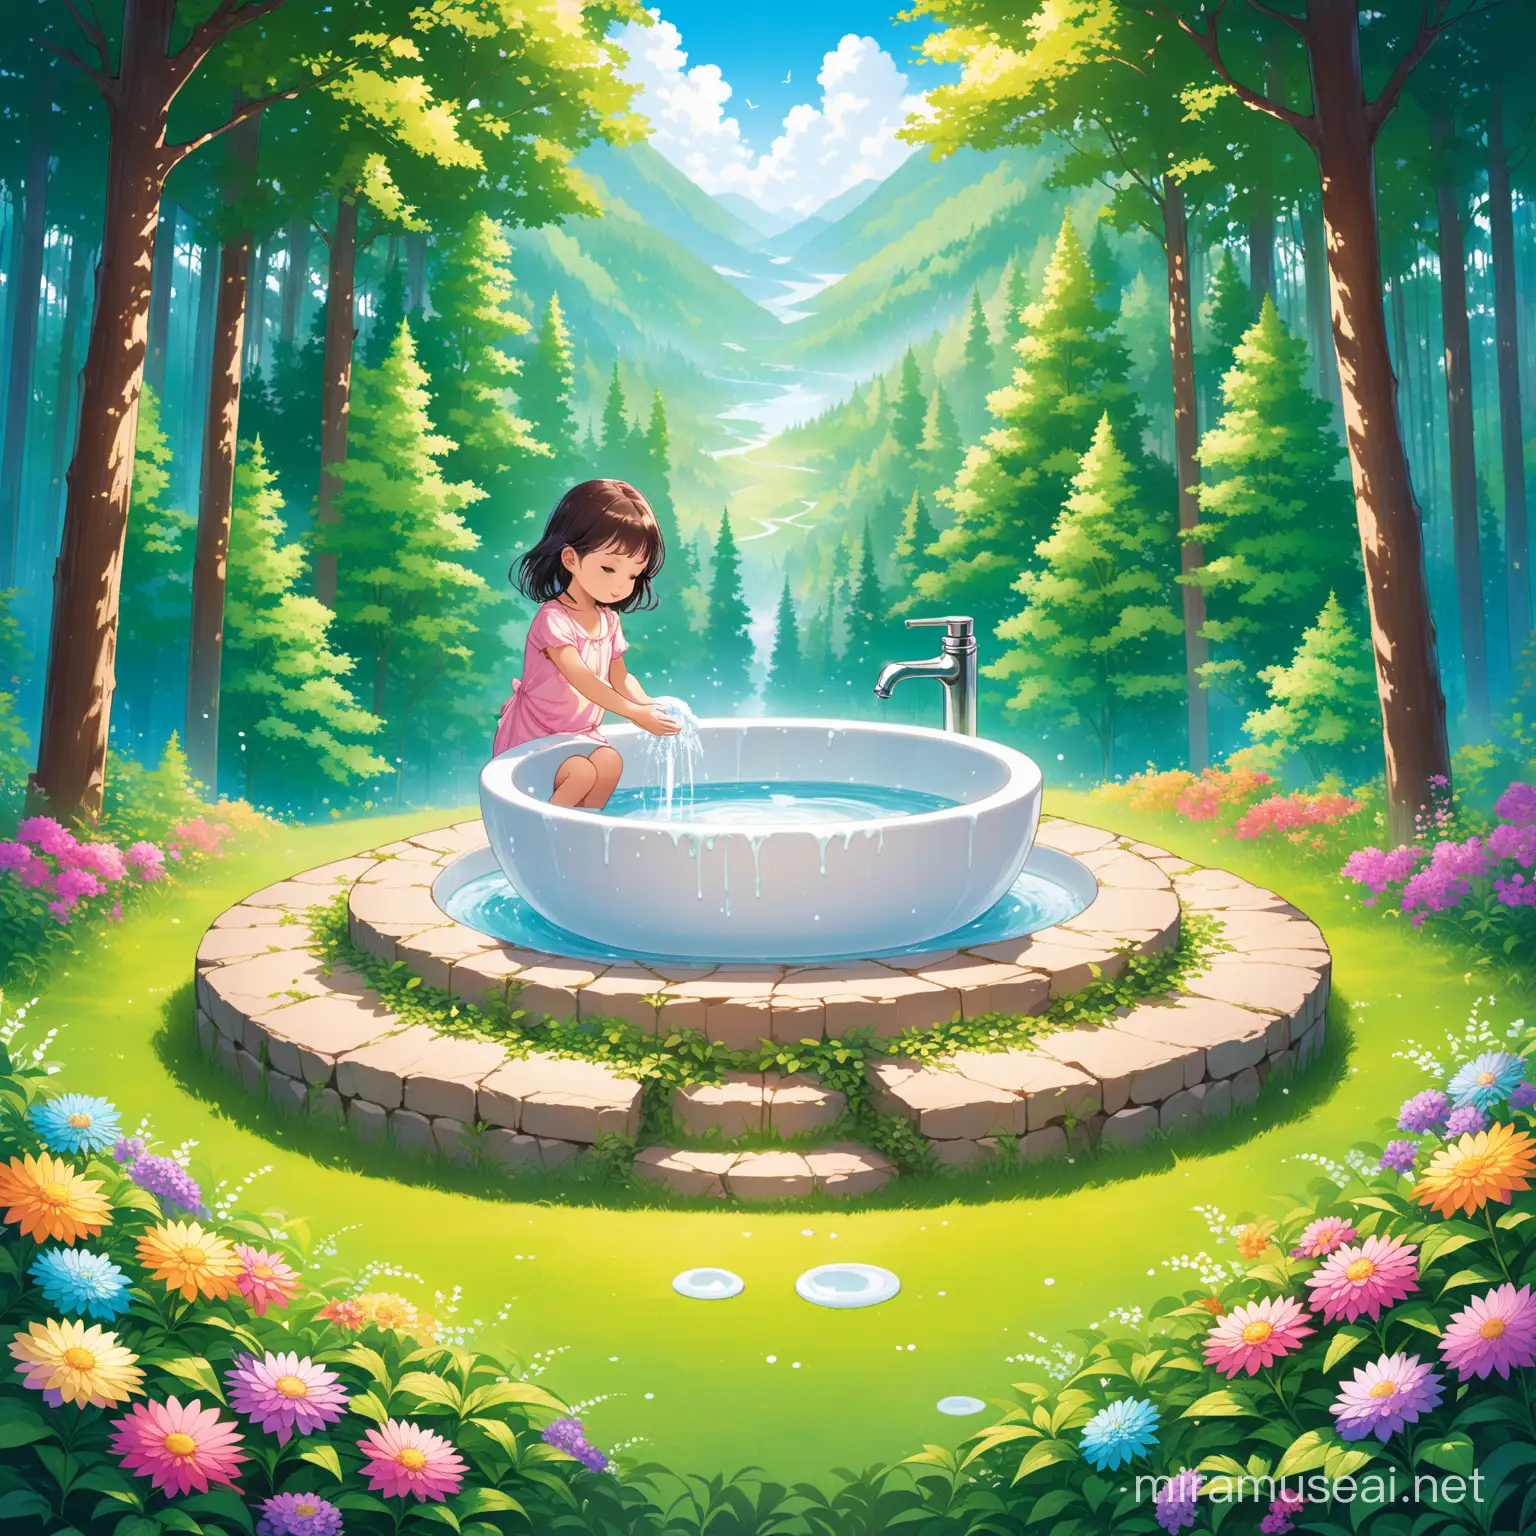 A visual illustration of collage created with a scenic view of summer forest with colorful blooms and greenery, along with a setup of luxury white wash-basin  kept in the center and a child washing hands from it